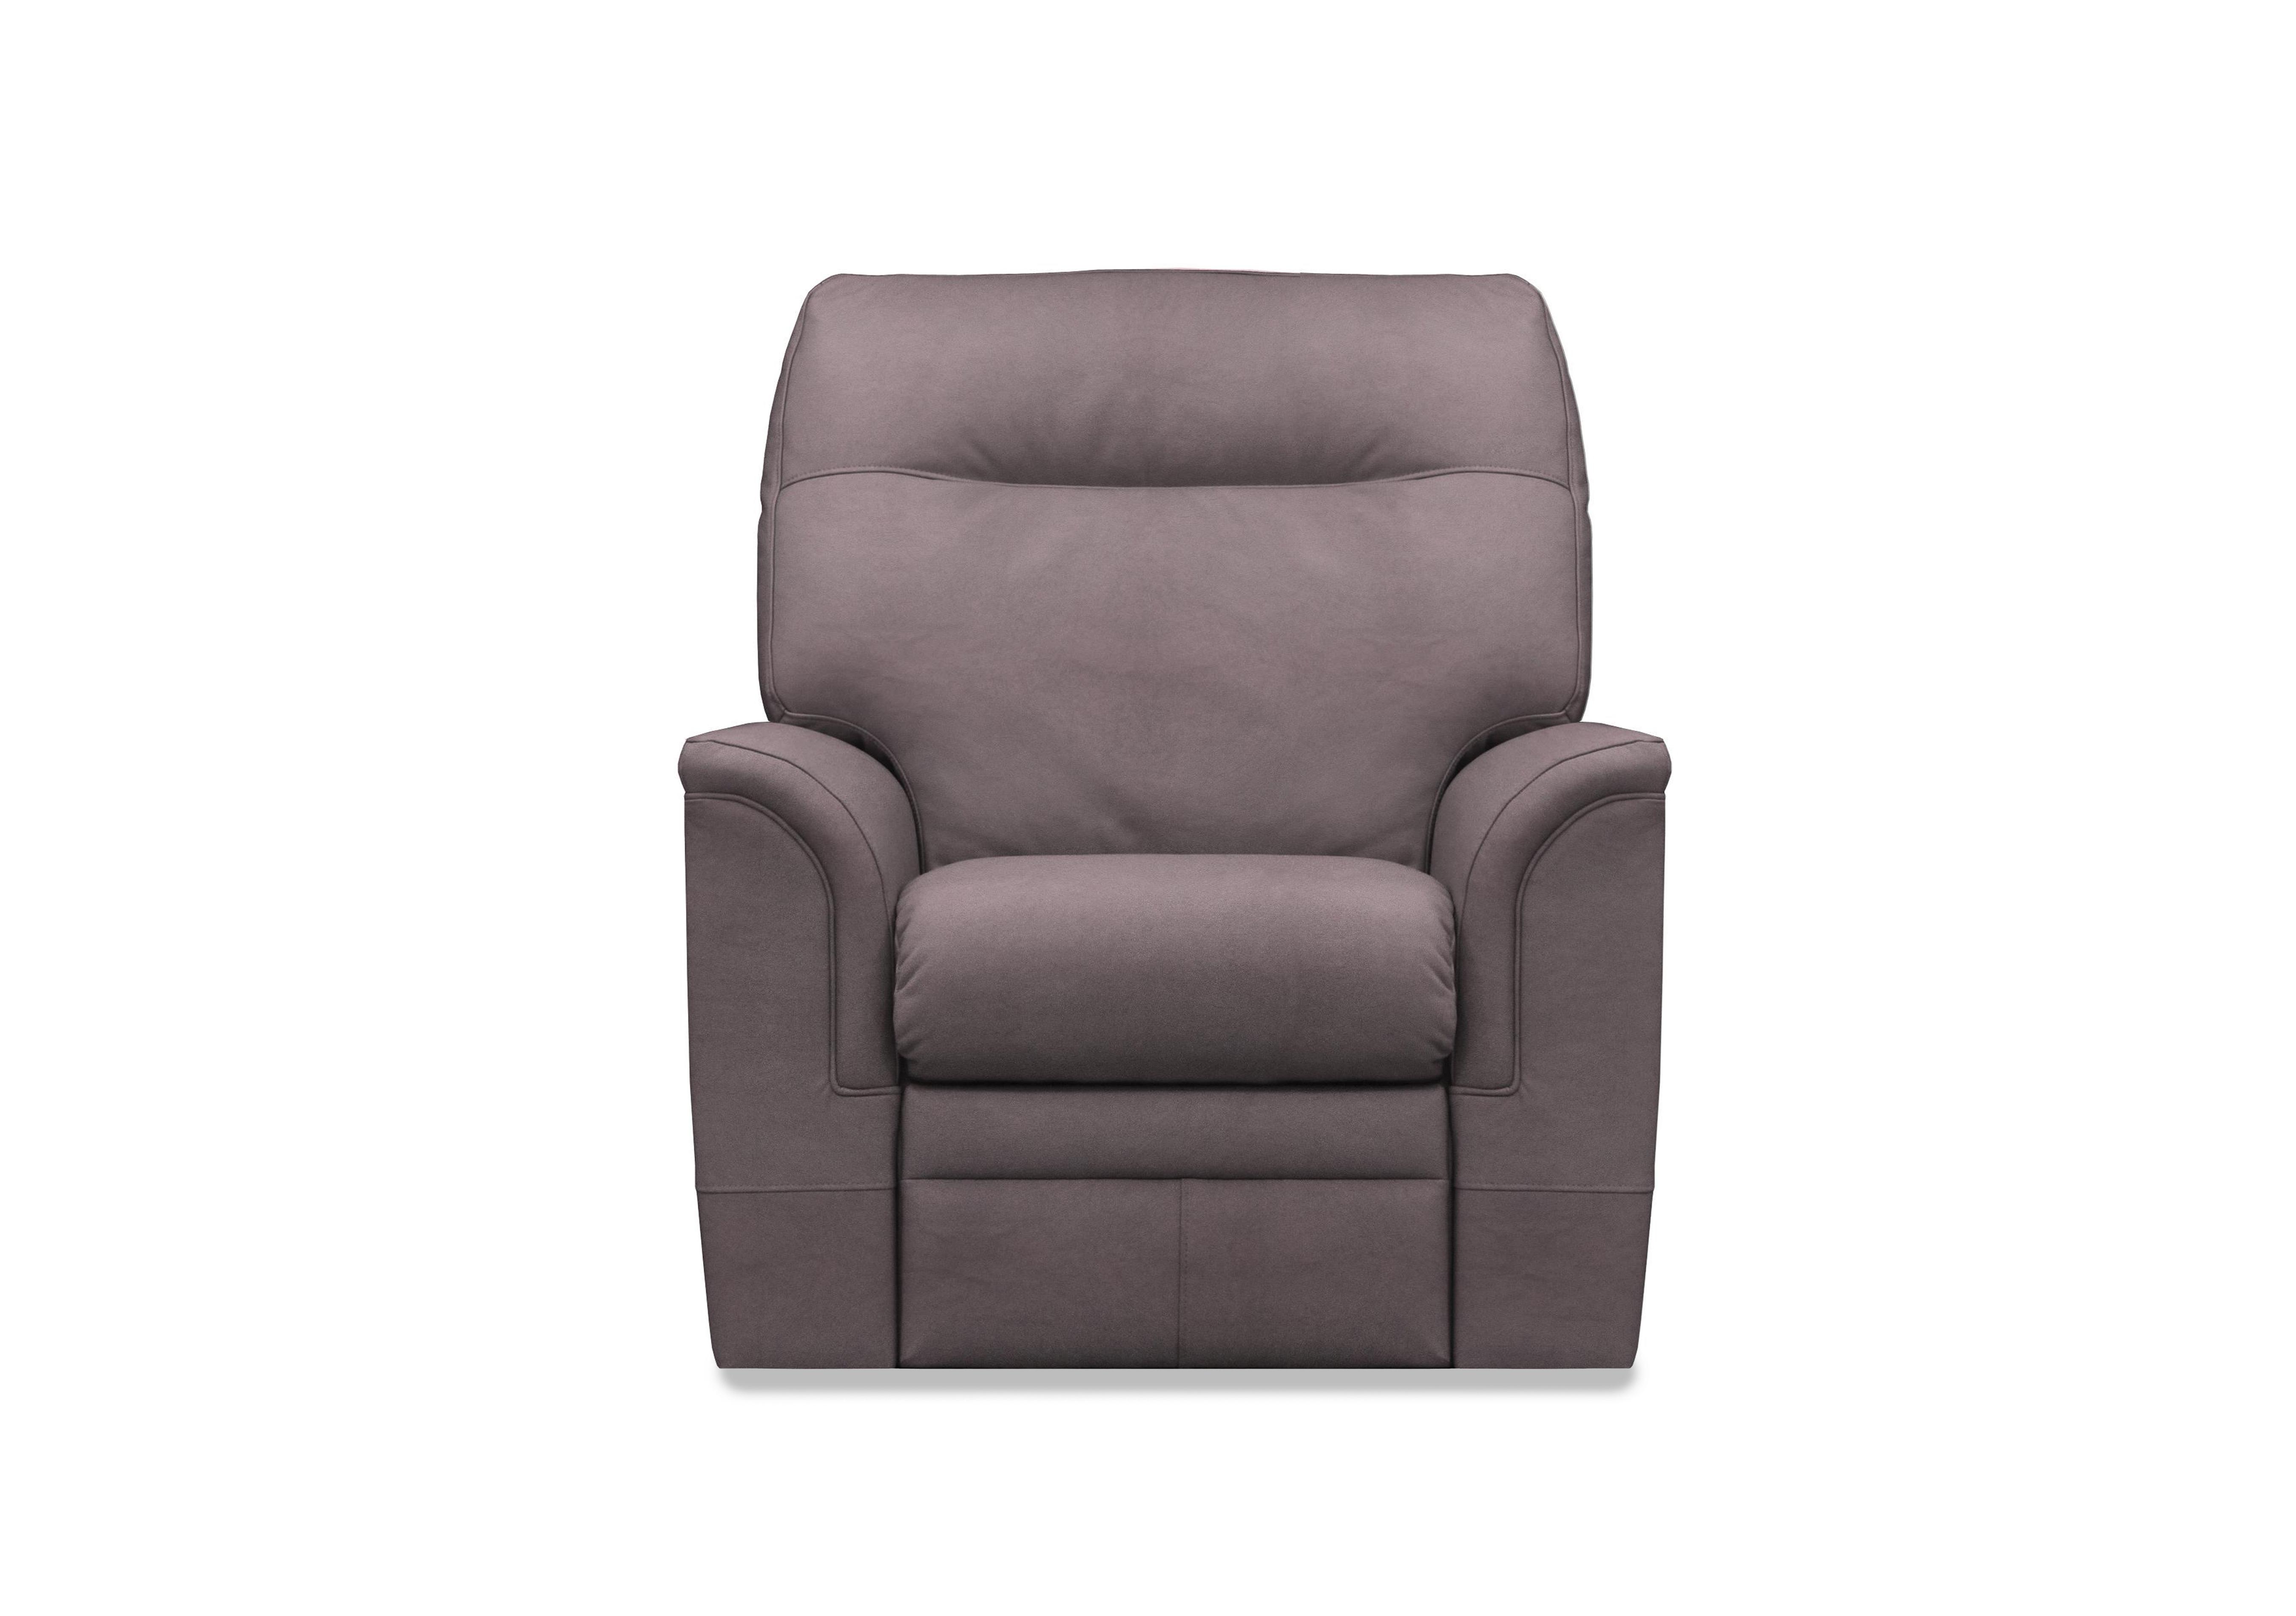 Hudson 23 Leather Lift and Rise Chair in Revolution Truffle 009027-0029 on Furniture Village